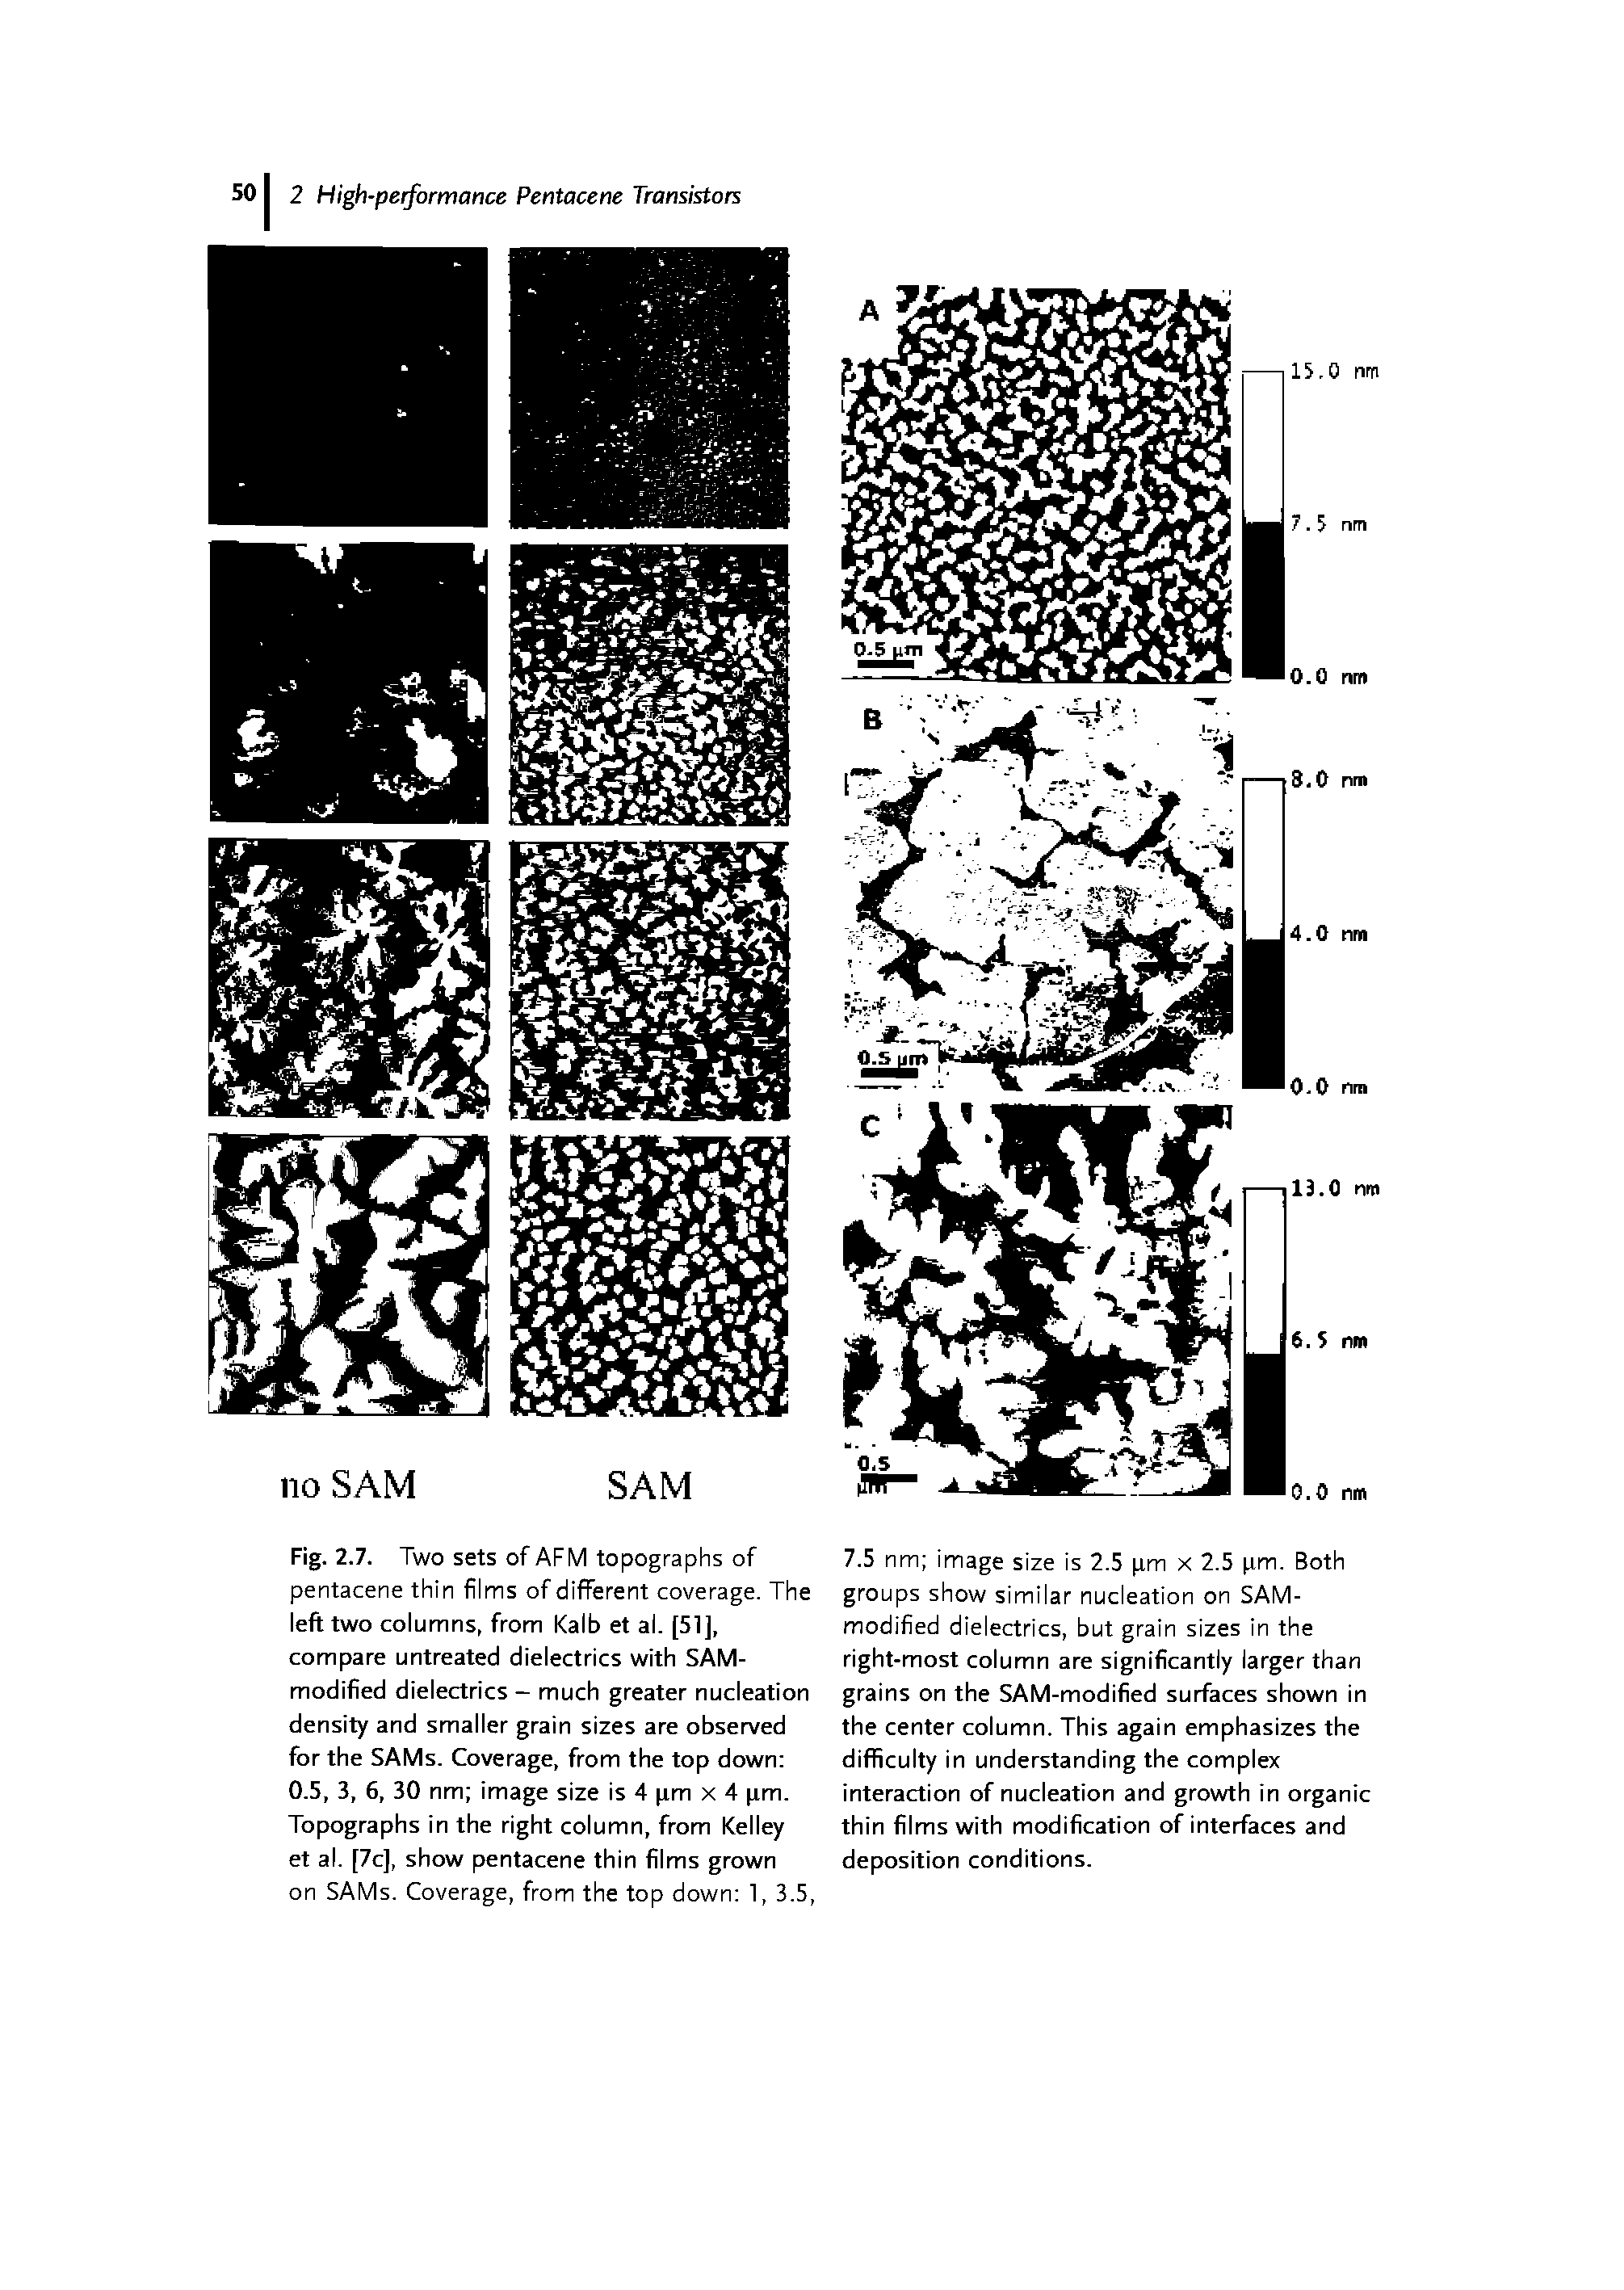 Fig. 2.7. Two sets of AFM topographs of pentacene thin films of different coverage. The left two columns, from Kalb et al. [51], compare untreated dielectrics with SAM-modified dielectrics - much greater nucleation density and smaller grain sizes are observed for the SAMs. Coverage, from the top down 0.5, 3, 6, 30 nm image size is 4 pm x 4 pm. Topographs in the right column, from Kelley et al. [7c], show pentacene thin films grown on SAMs. Coverage, from the top down 1, 3.5,...